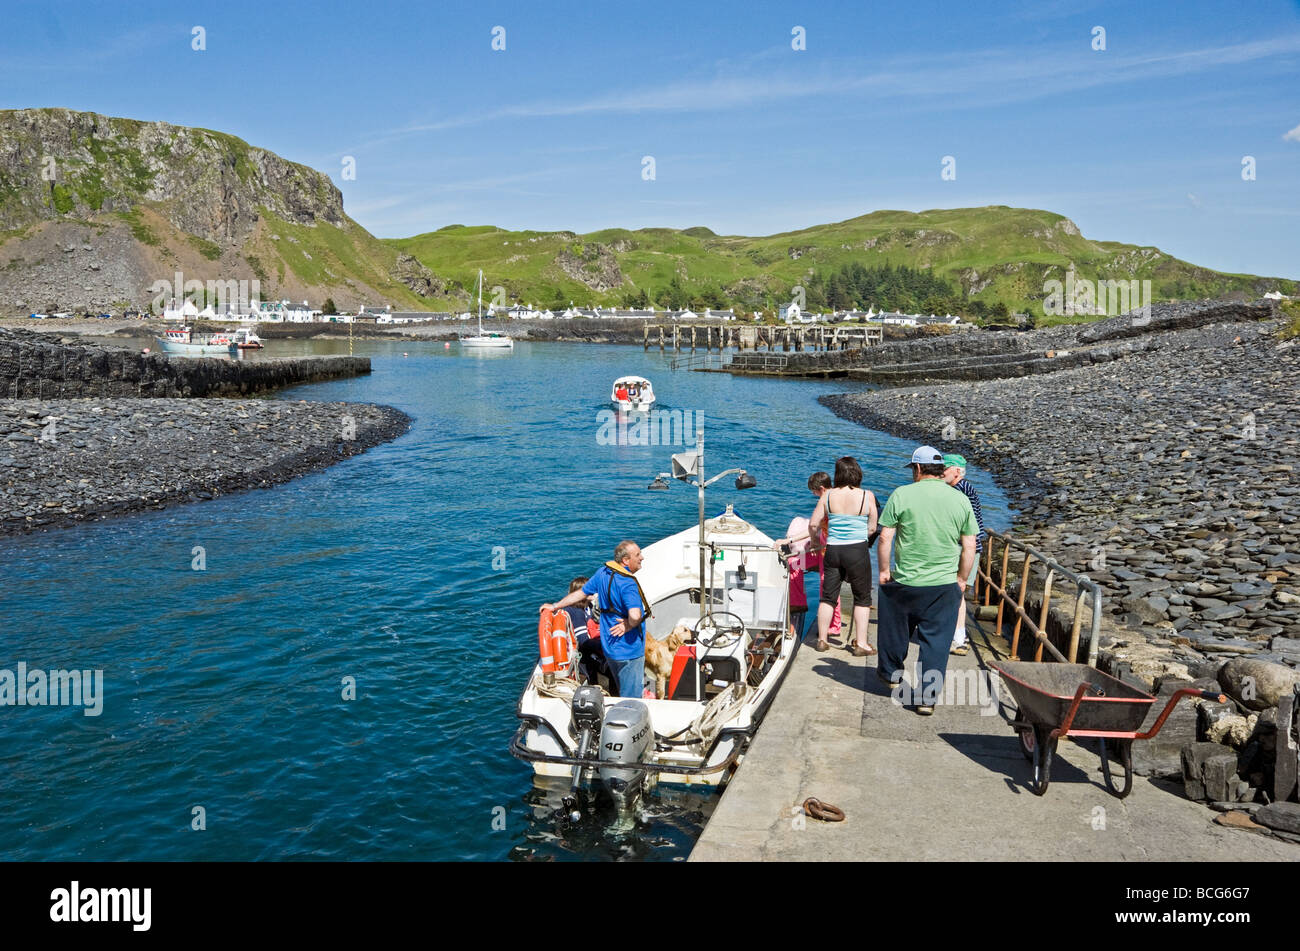 Passengers boarding the small ferry on the Island of Easdale taking passengers to the village of Easdale on the Island of Seil. Stock Photo